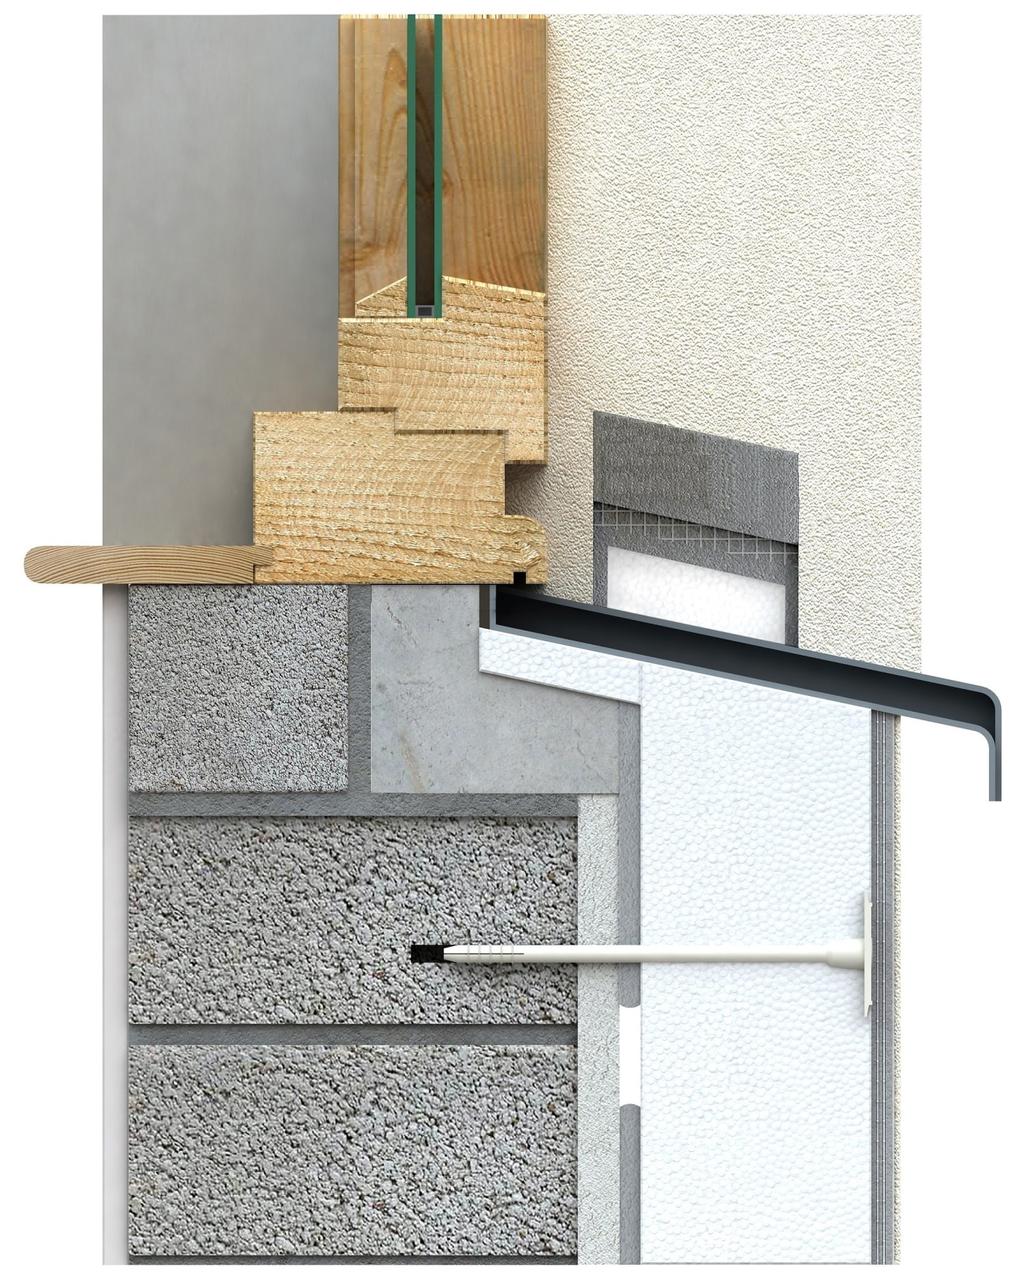 Insulation layer between new and existing window sill to achieve minimum R-value of 0.